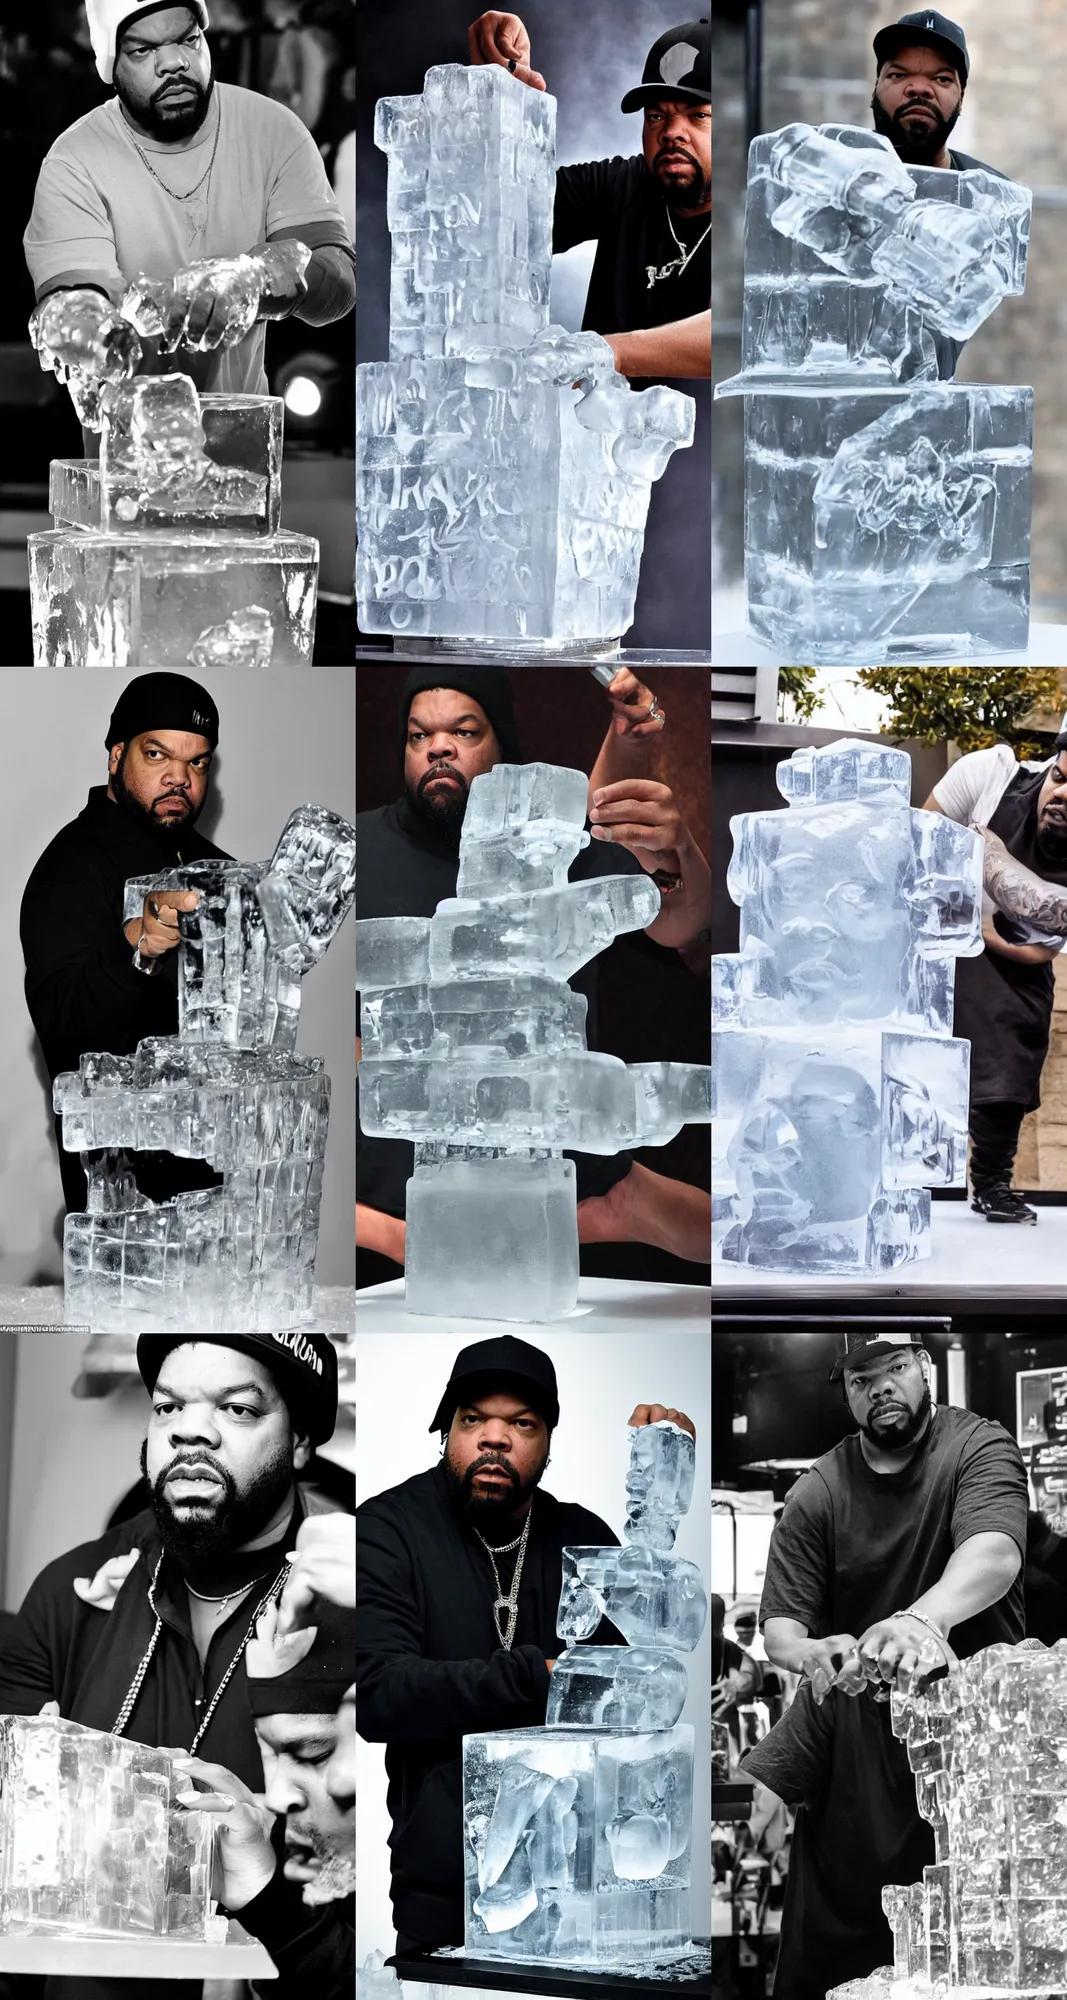 Prompt: dramatic photo, the rapper'ice cube'making an ice sculpture that looks like himself